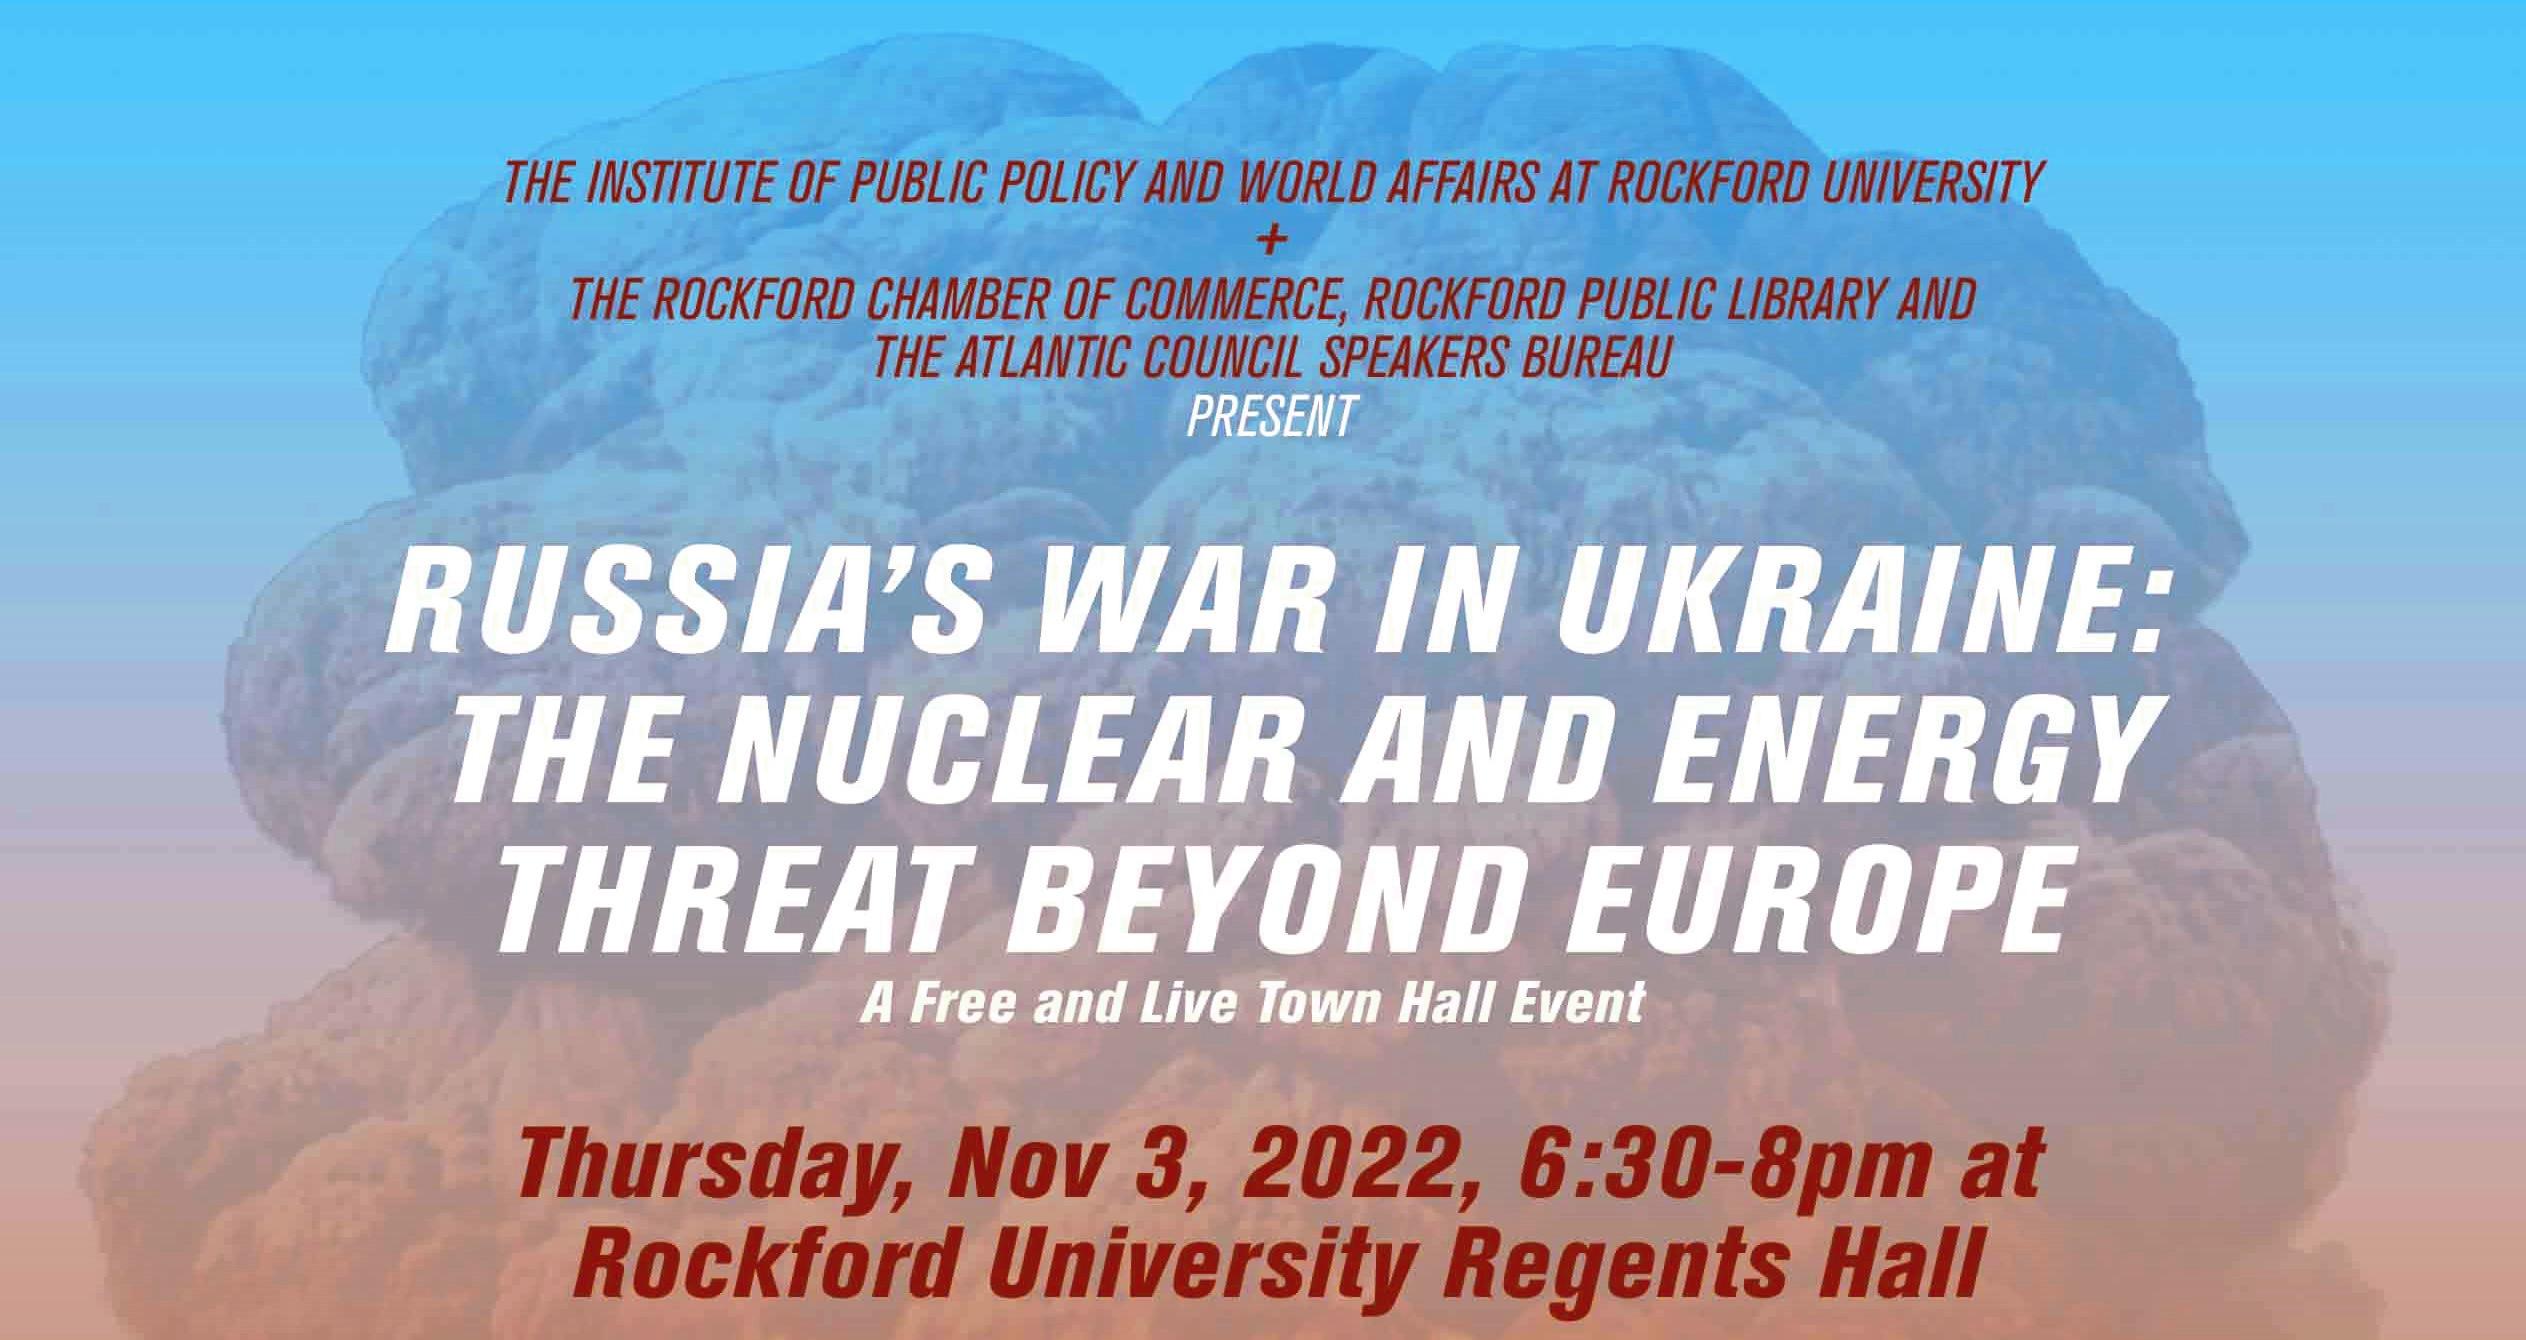 Image for RUSSIA’S WAR IN UKRAINE: Nuclear and Energy Threats Beyond Europe webinar